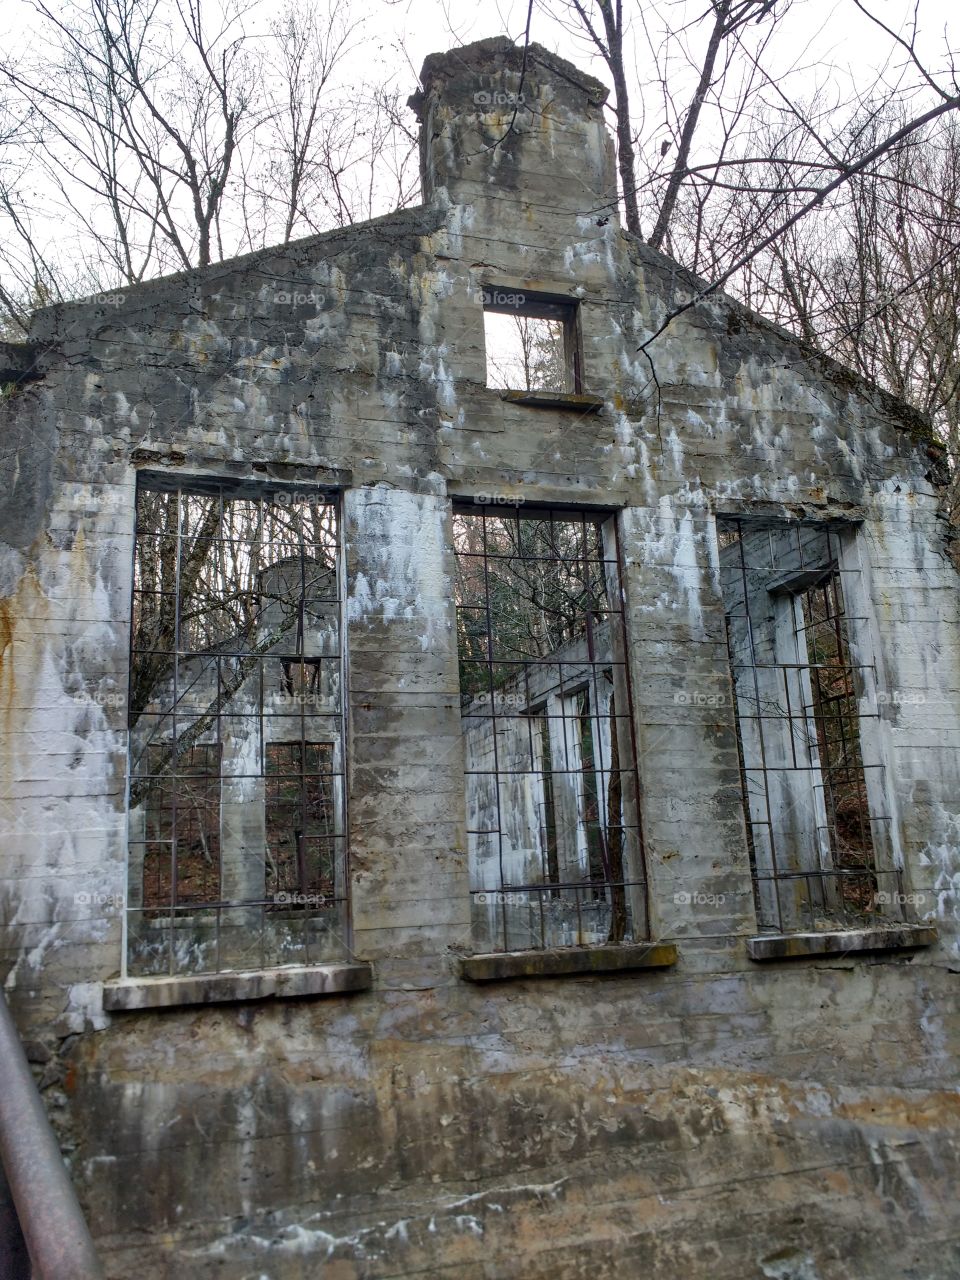 Windows of an abandoned mill building. Looking in you can see trees growing. This architectural wonder is located in Gatineau Park, Quebec, Canada.